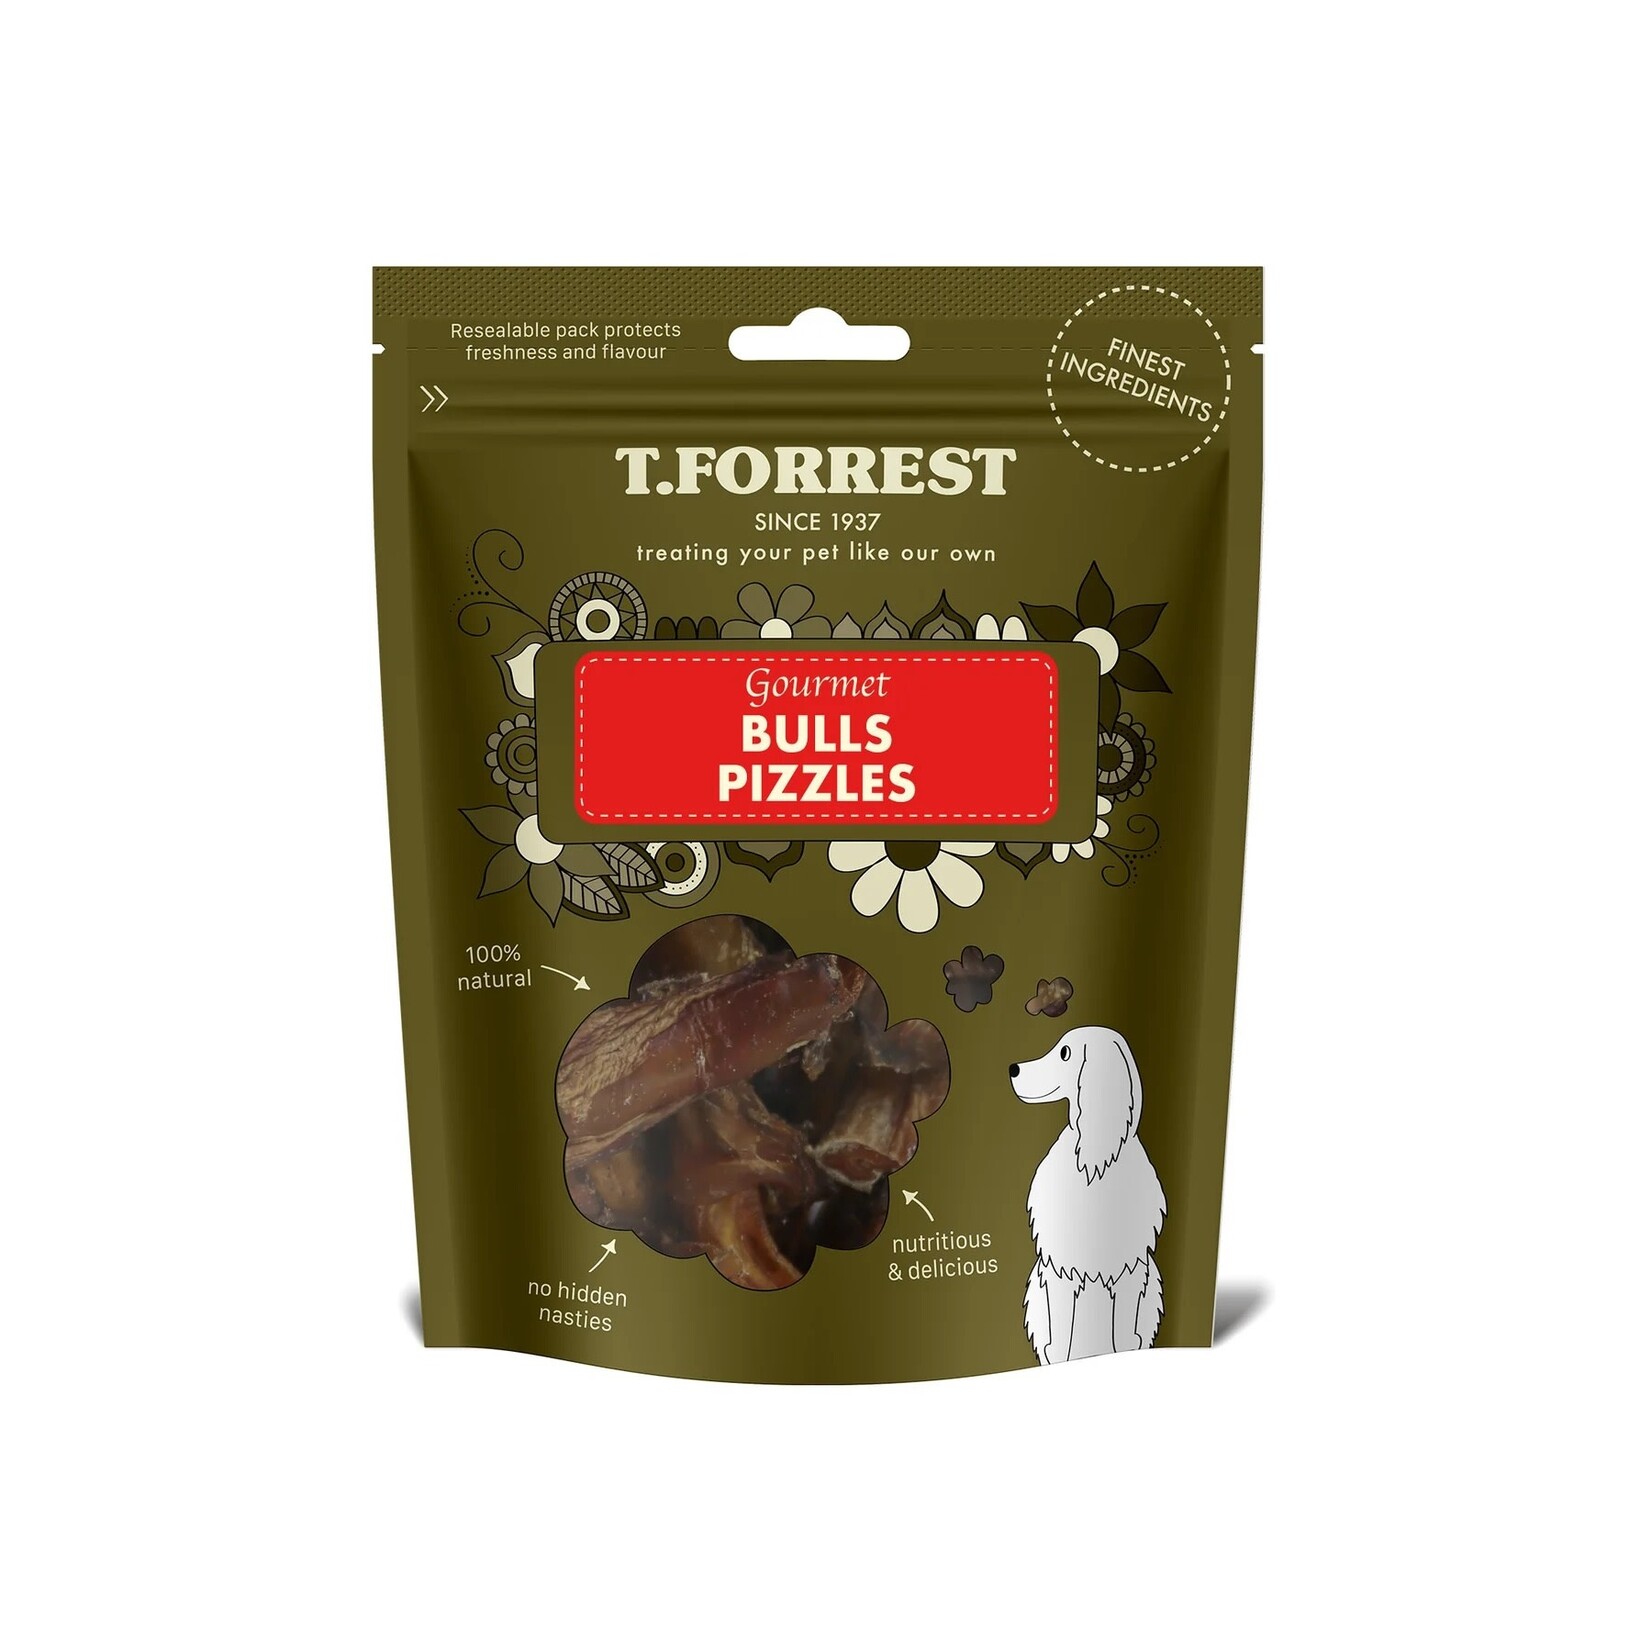 T.Forrest Air Dried Bull's Pizzle Dog Treats, 10 pack